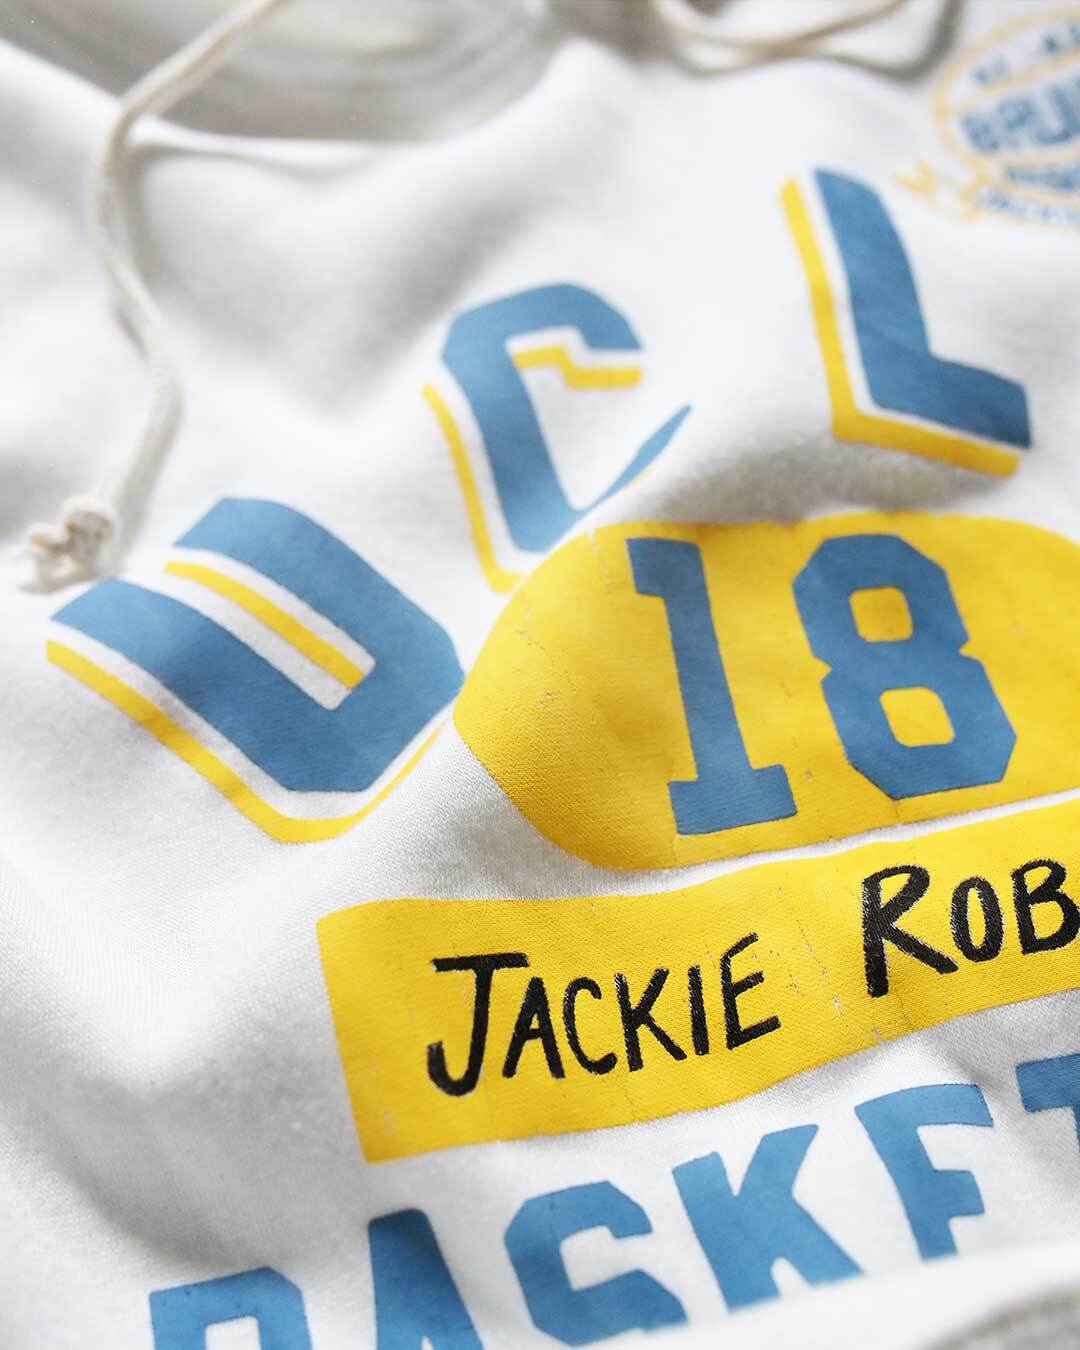 UCLA - Jackie Robinson Basketball Ivory PO Hoody - Roots of Fight